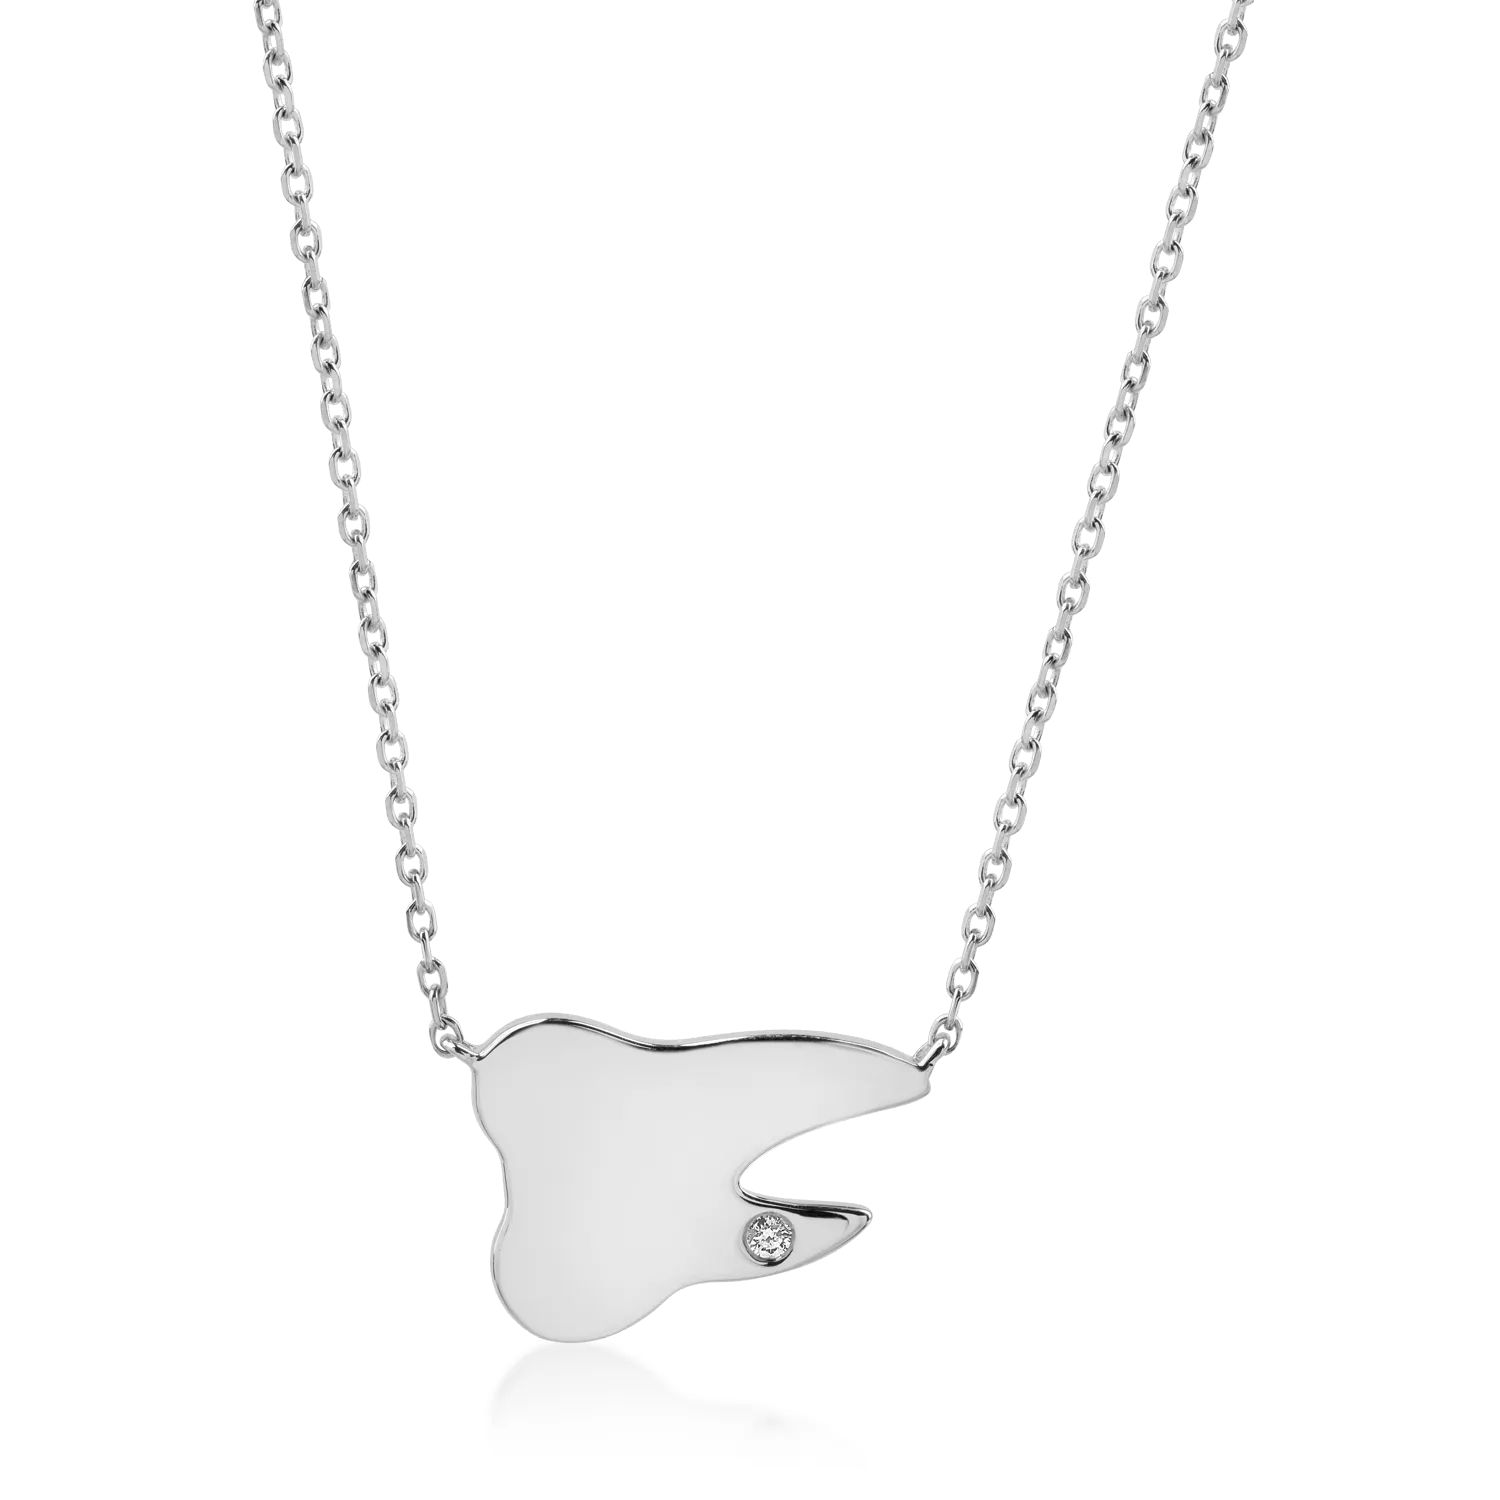 White gold pendant necklace with 0.02ct diamond